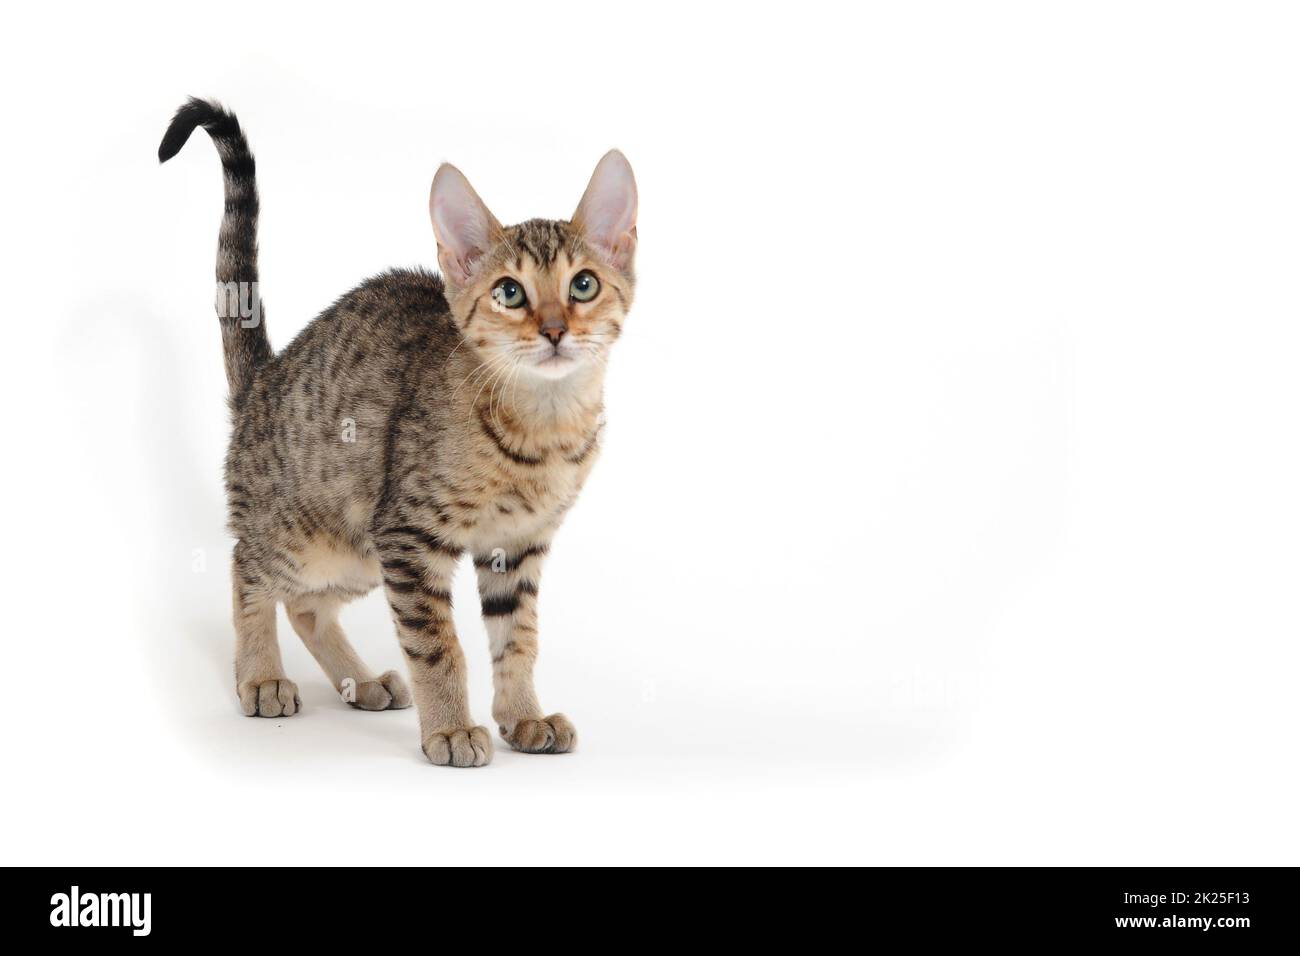 Purebred smooth-haired kitten on a white background Stock Photo